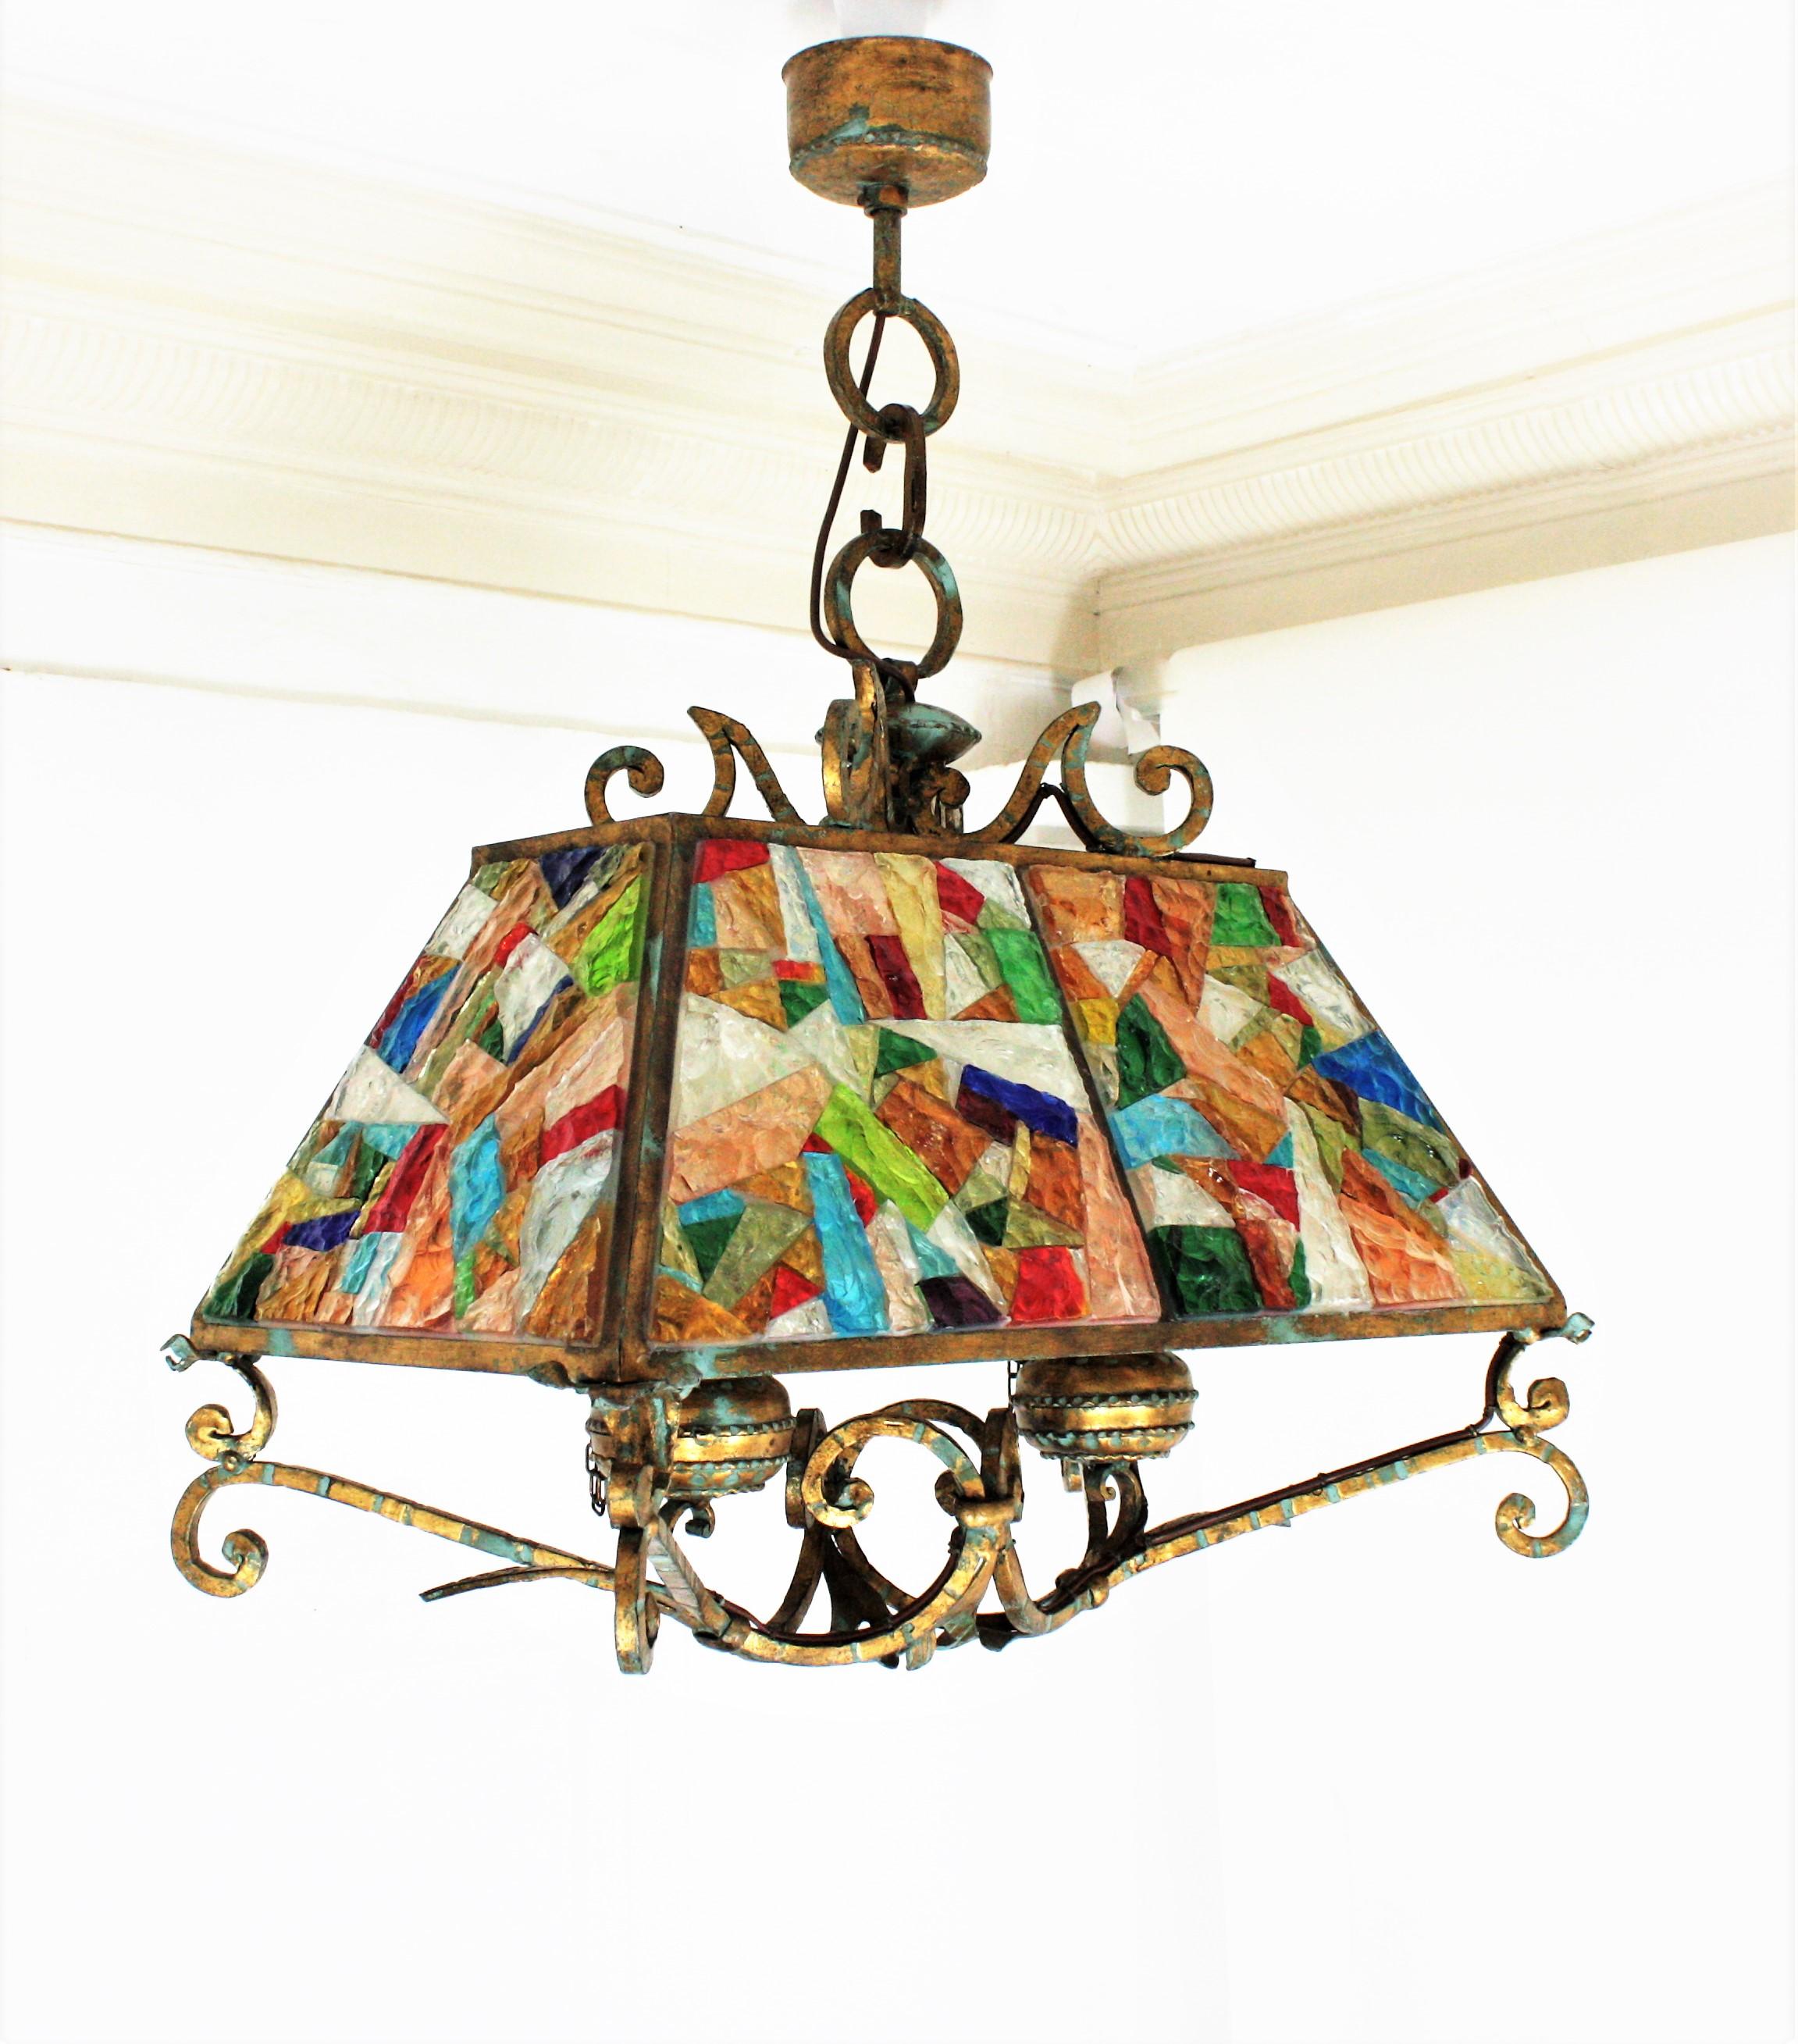 Poliarte Longobard Chandelier in Wrought Iron with Multi-Color Glasses For Sale 1